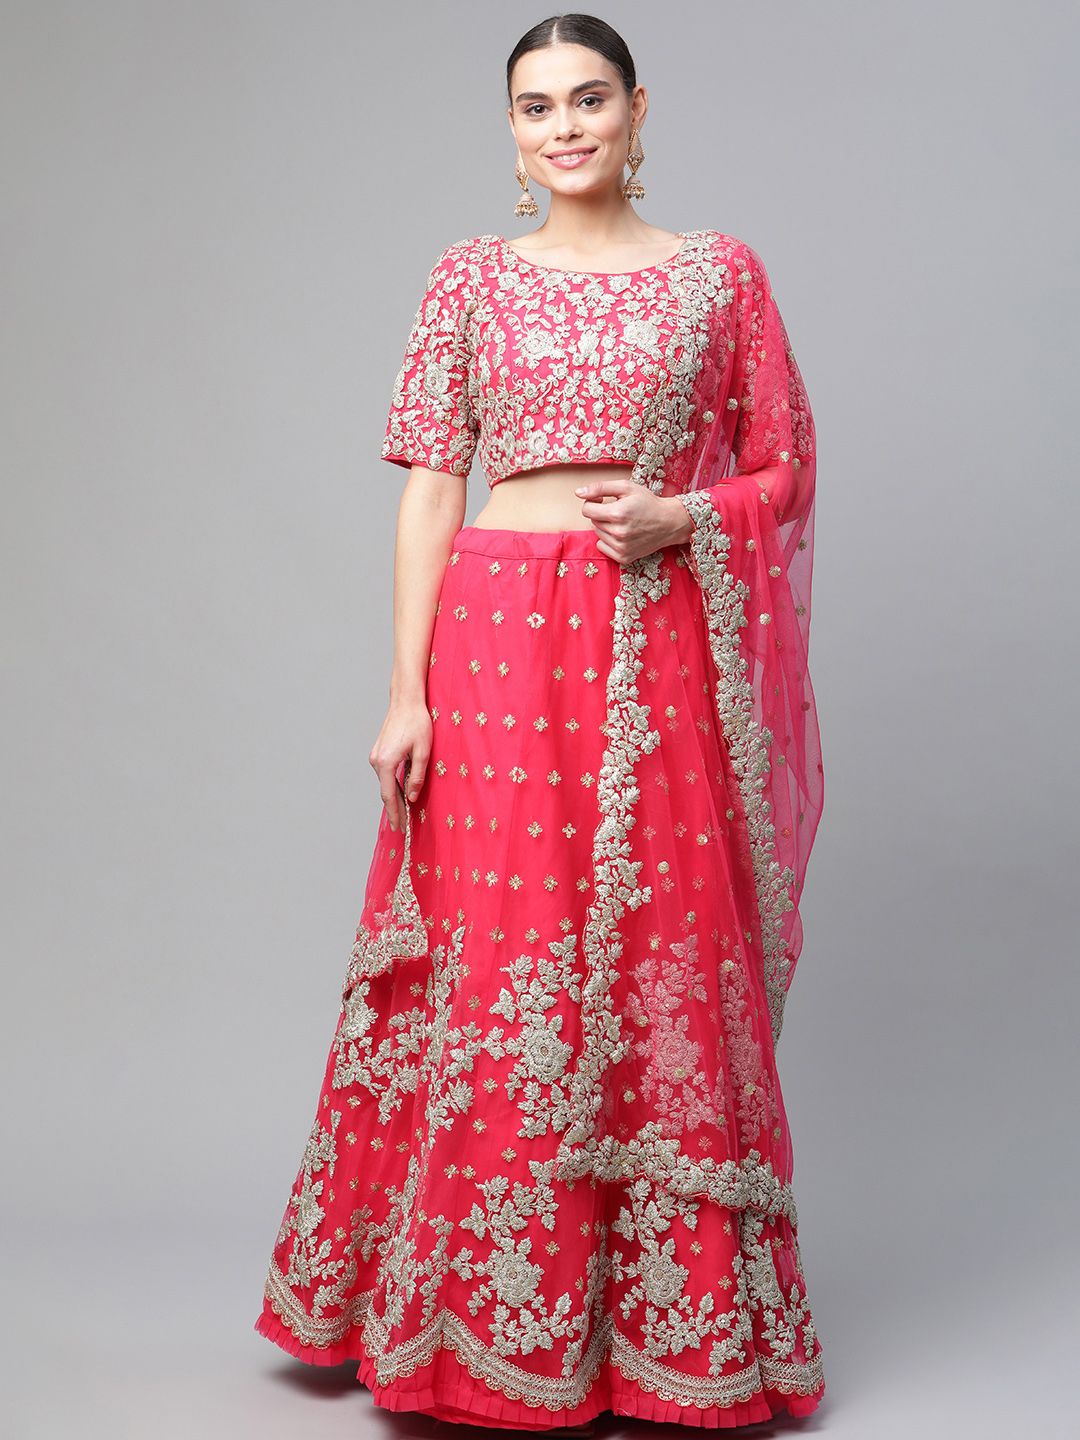 Readiprint Fashions Pink & Silver-Toned Embroidered Thread Work Semi-Stitched Lehenga & Unstitched Blouse Price in India